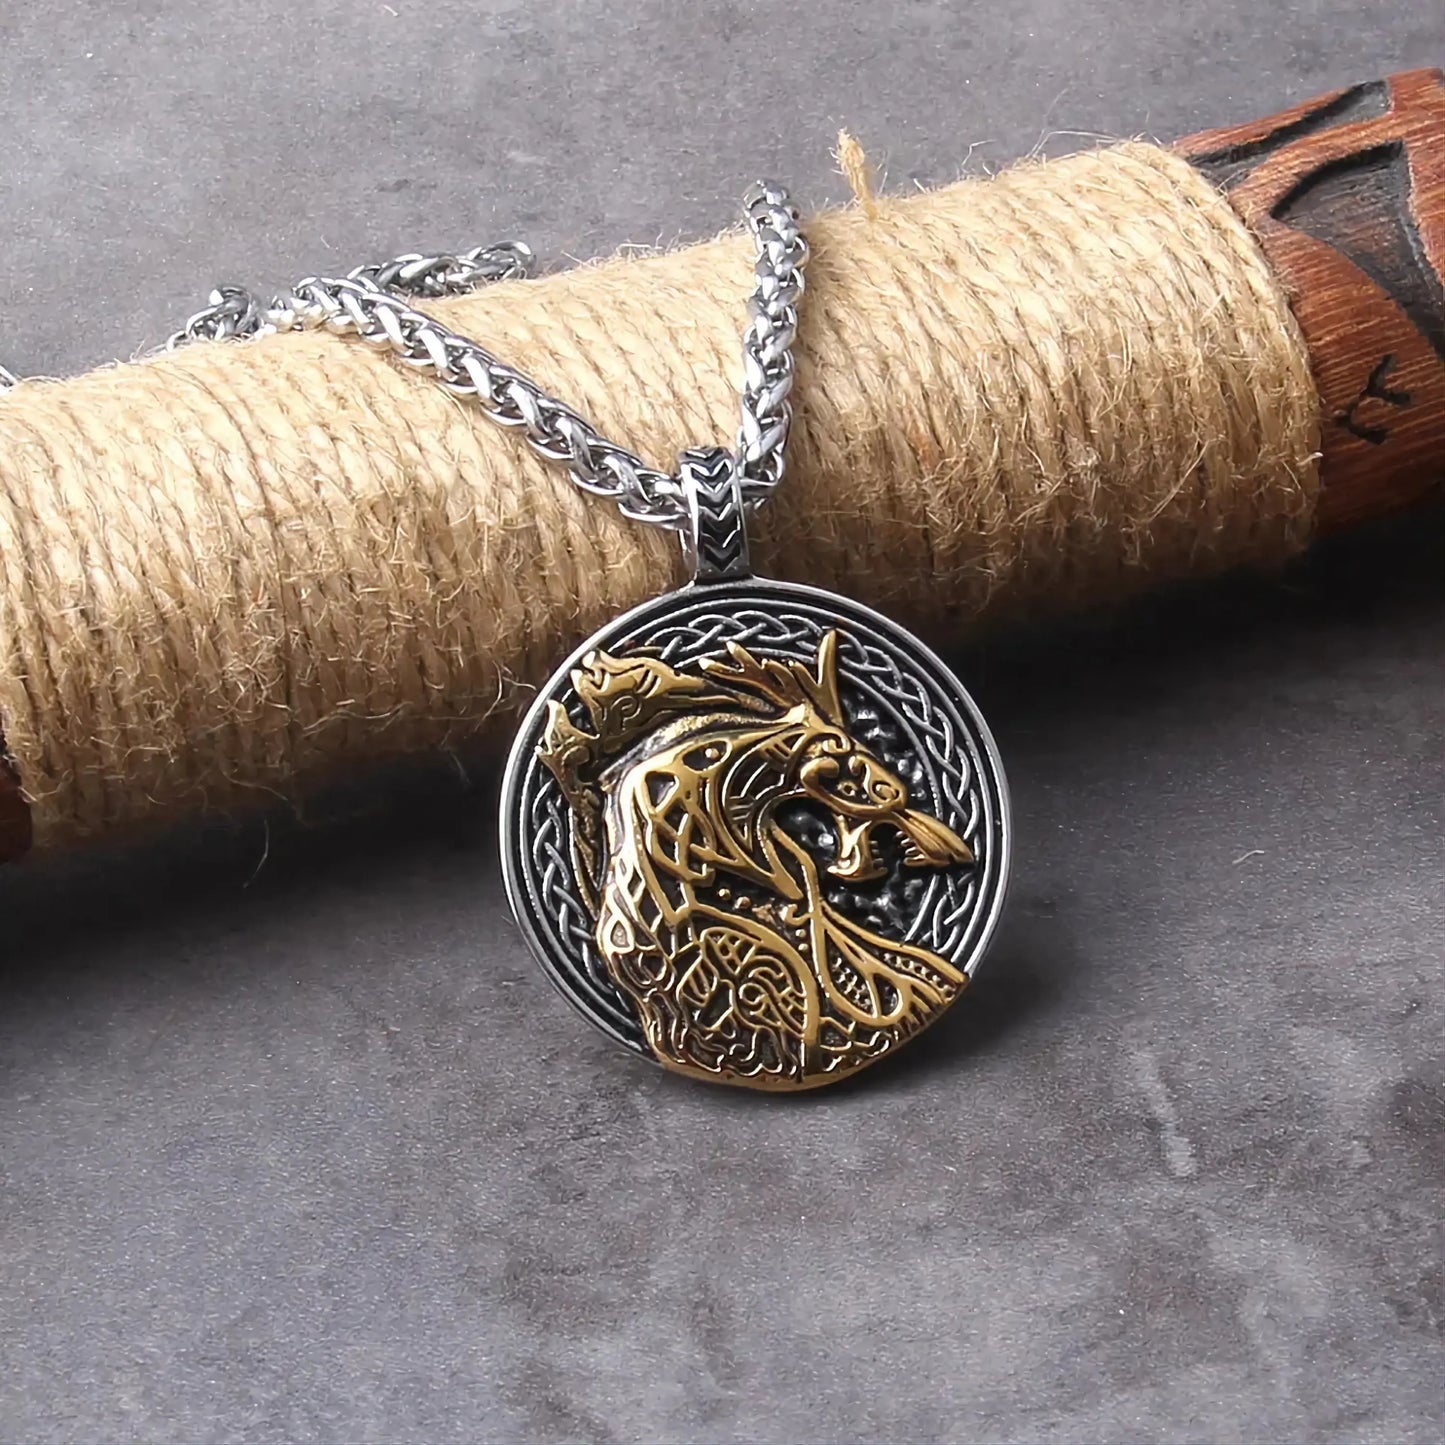 Stainless Steel Fenrir Head Pendant Necklace with Free Box and Gift Bag Steel Jewelry Necklace JettsJewelers